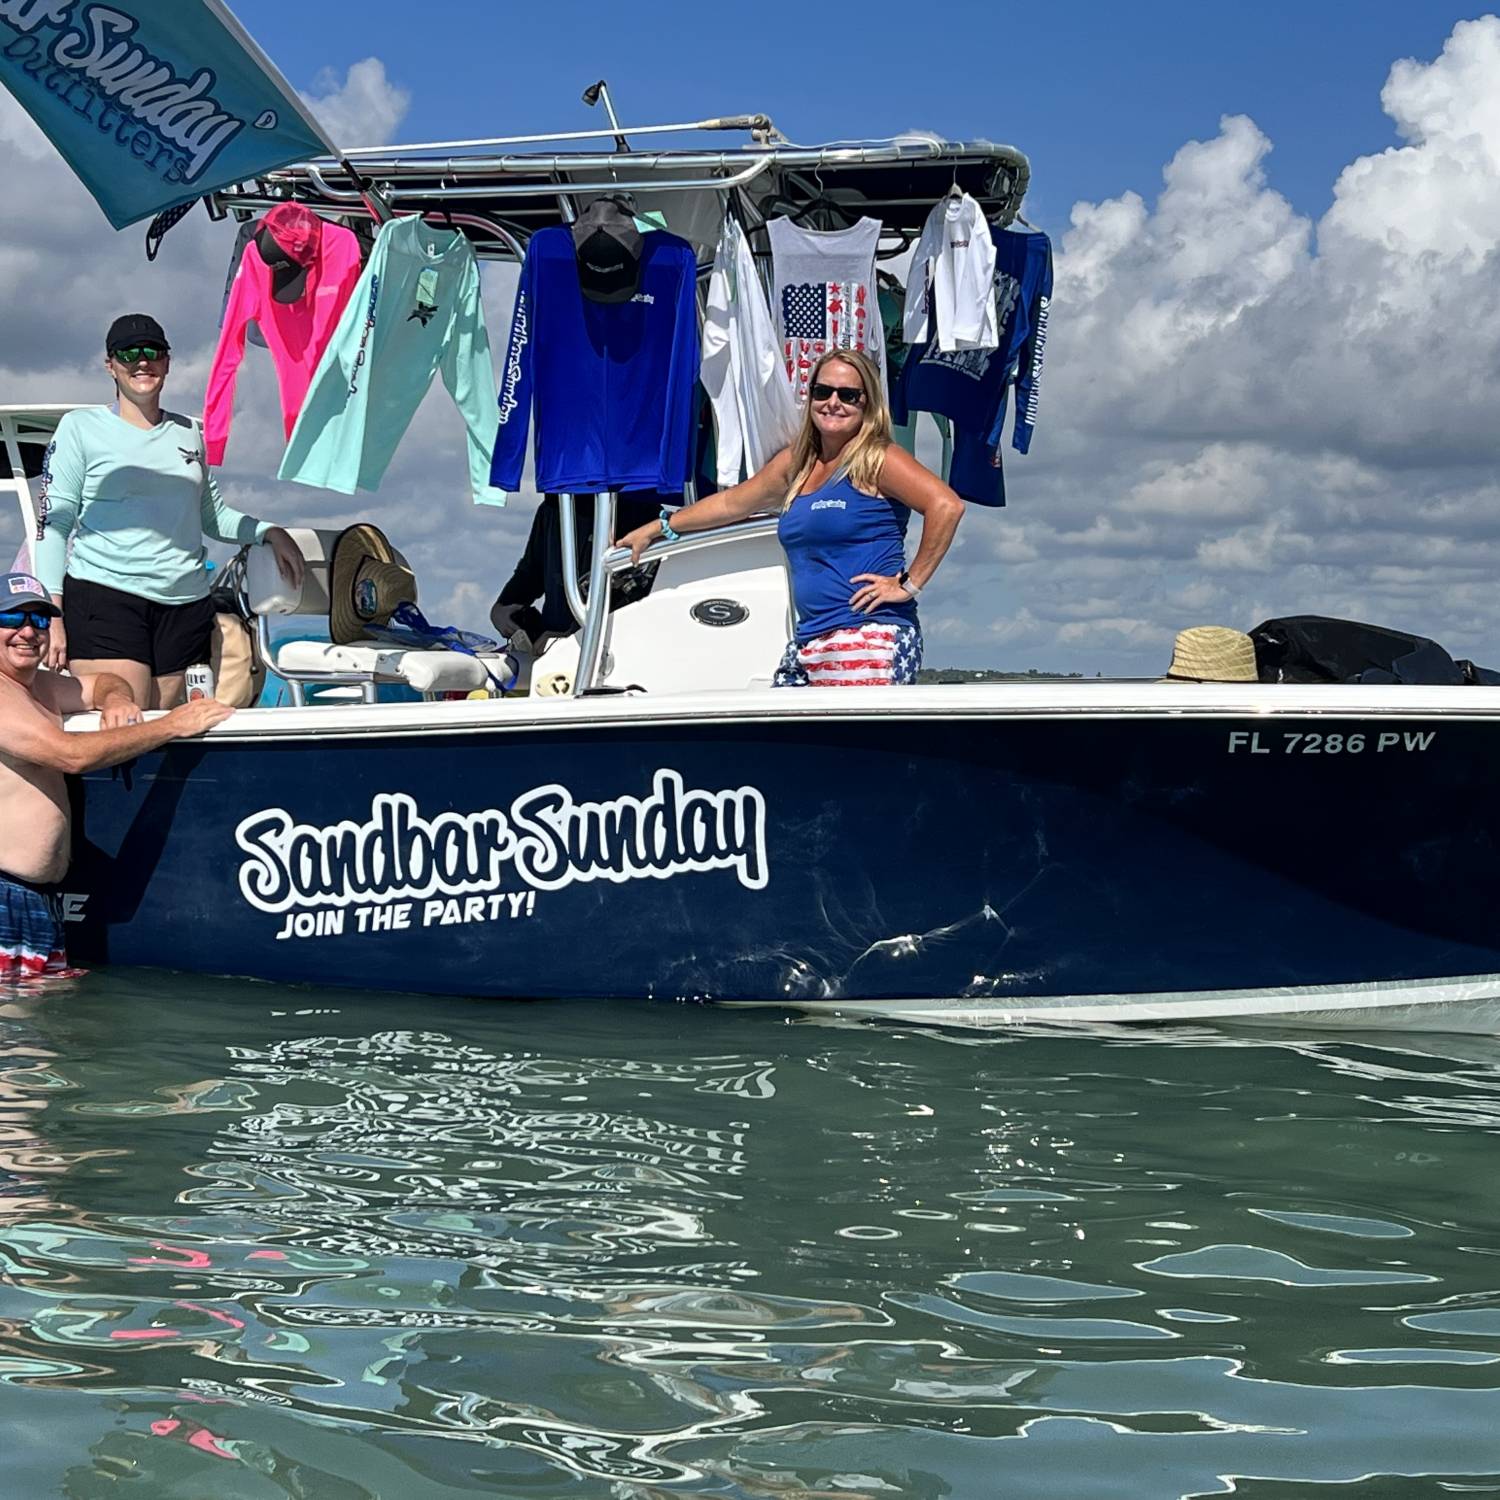 Selling at the Sandbar during the Star Spangled Raft Up, sponsored by my brand.